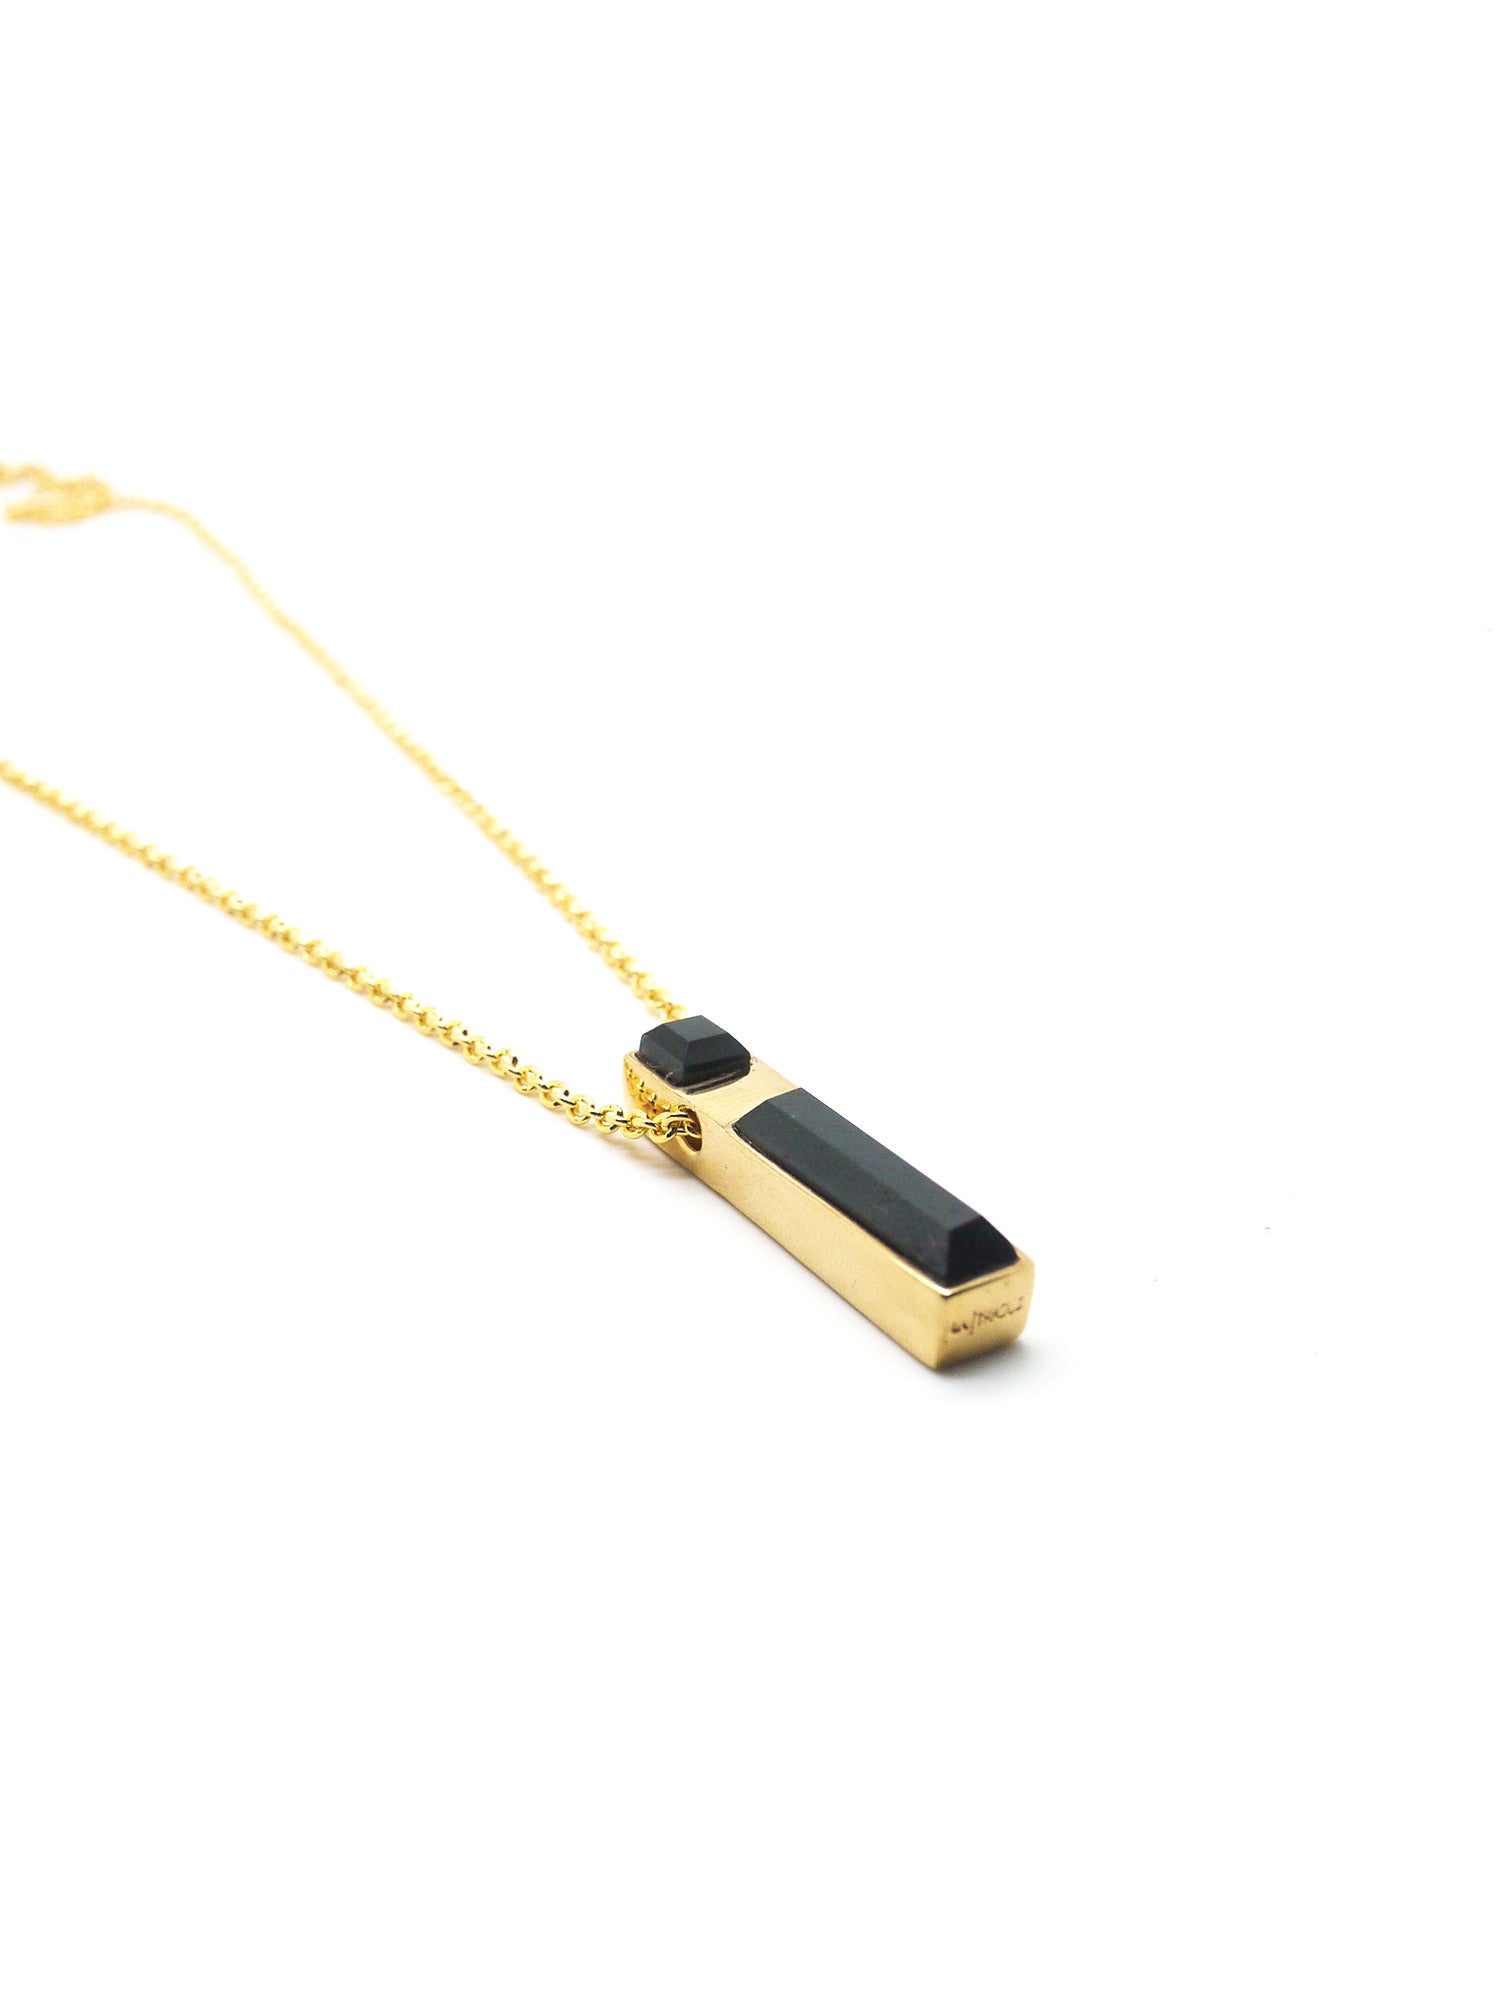 Linear Necklace - Gold - Onyx